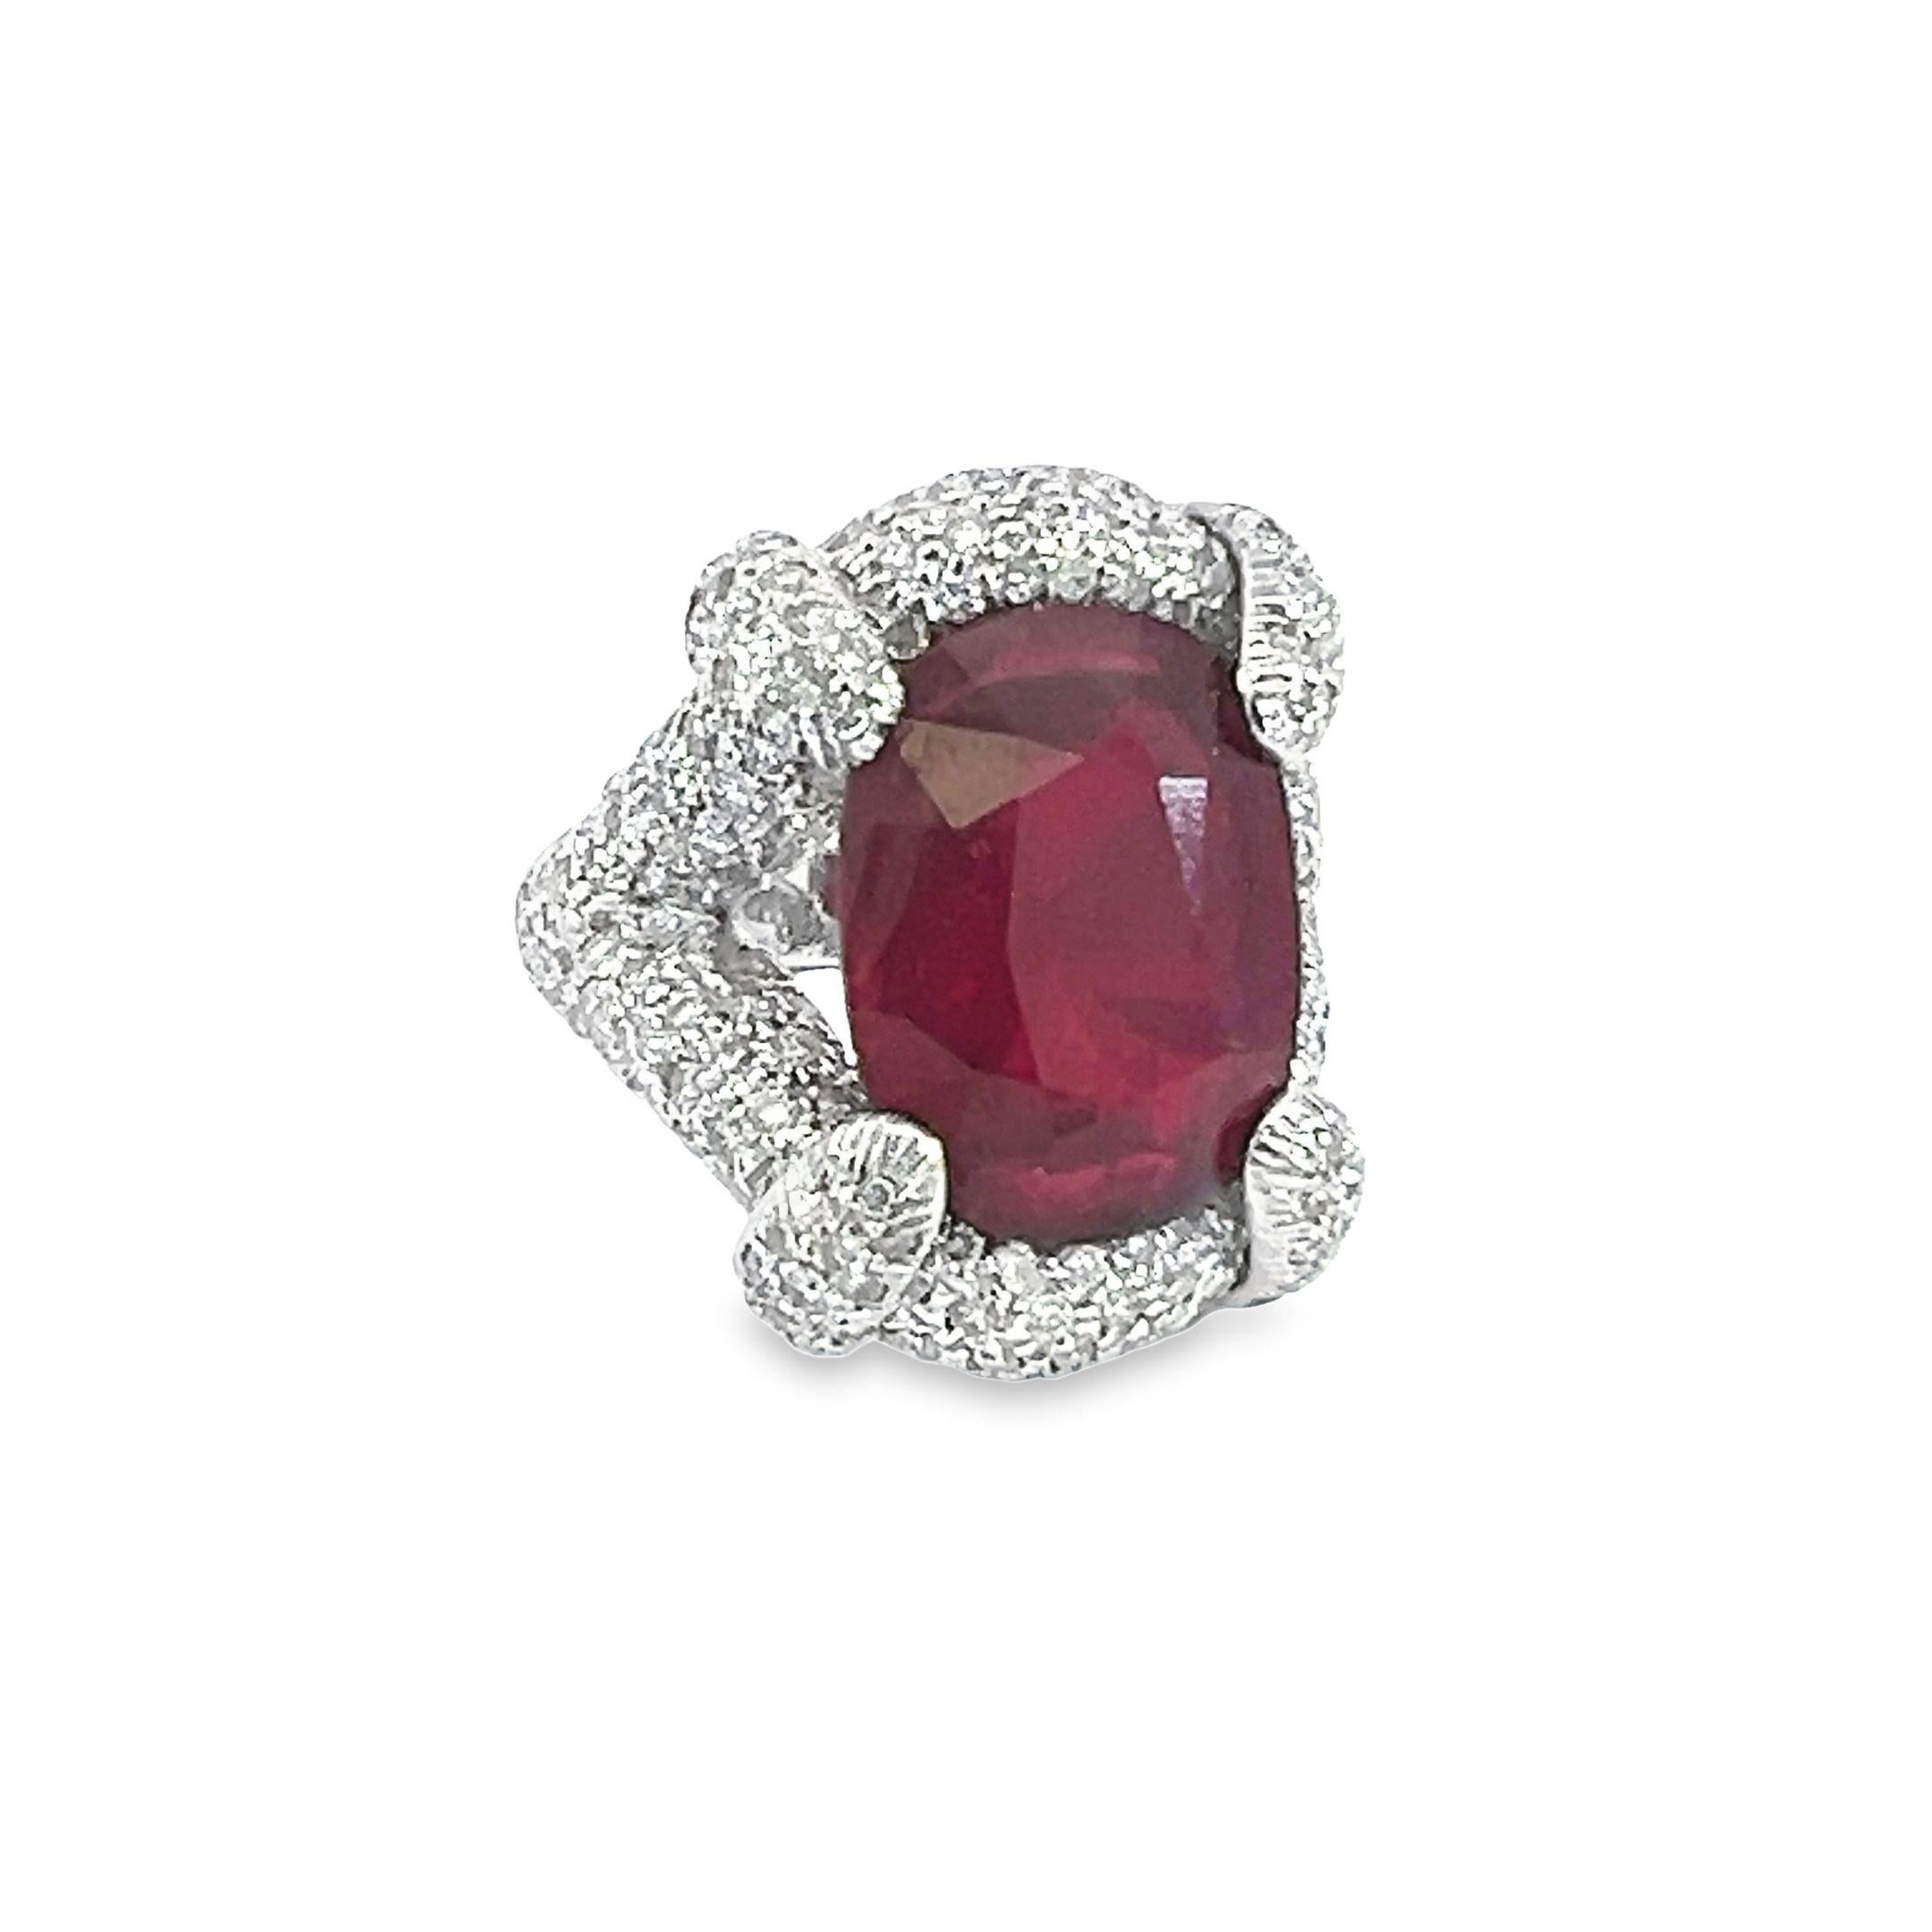 A beautiful natural glass filled Ruby Diamond ring set in 18Kt gold For Sale 1